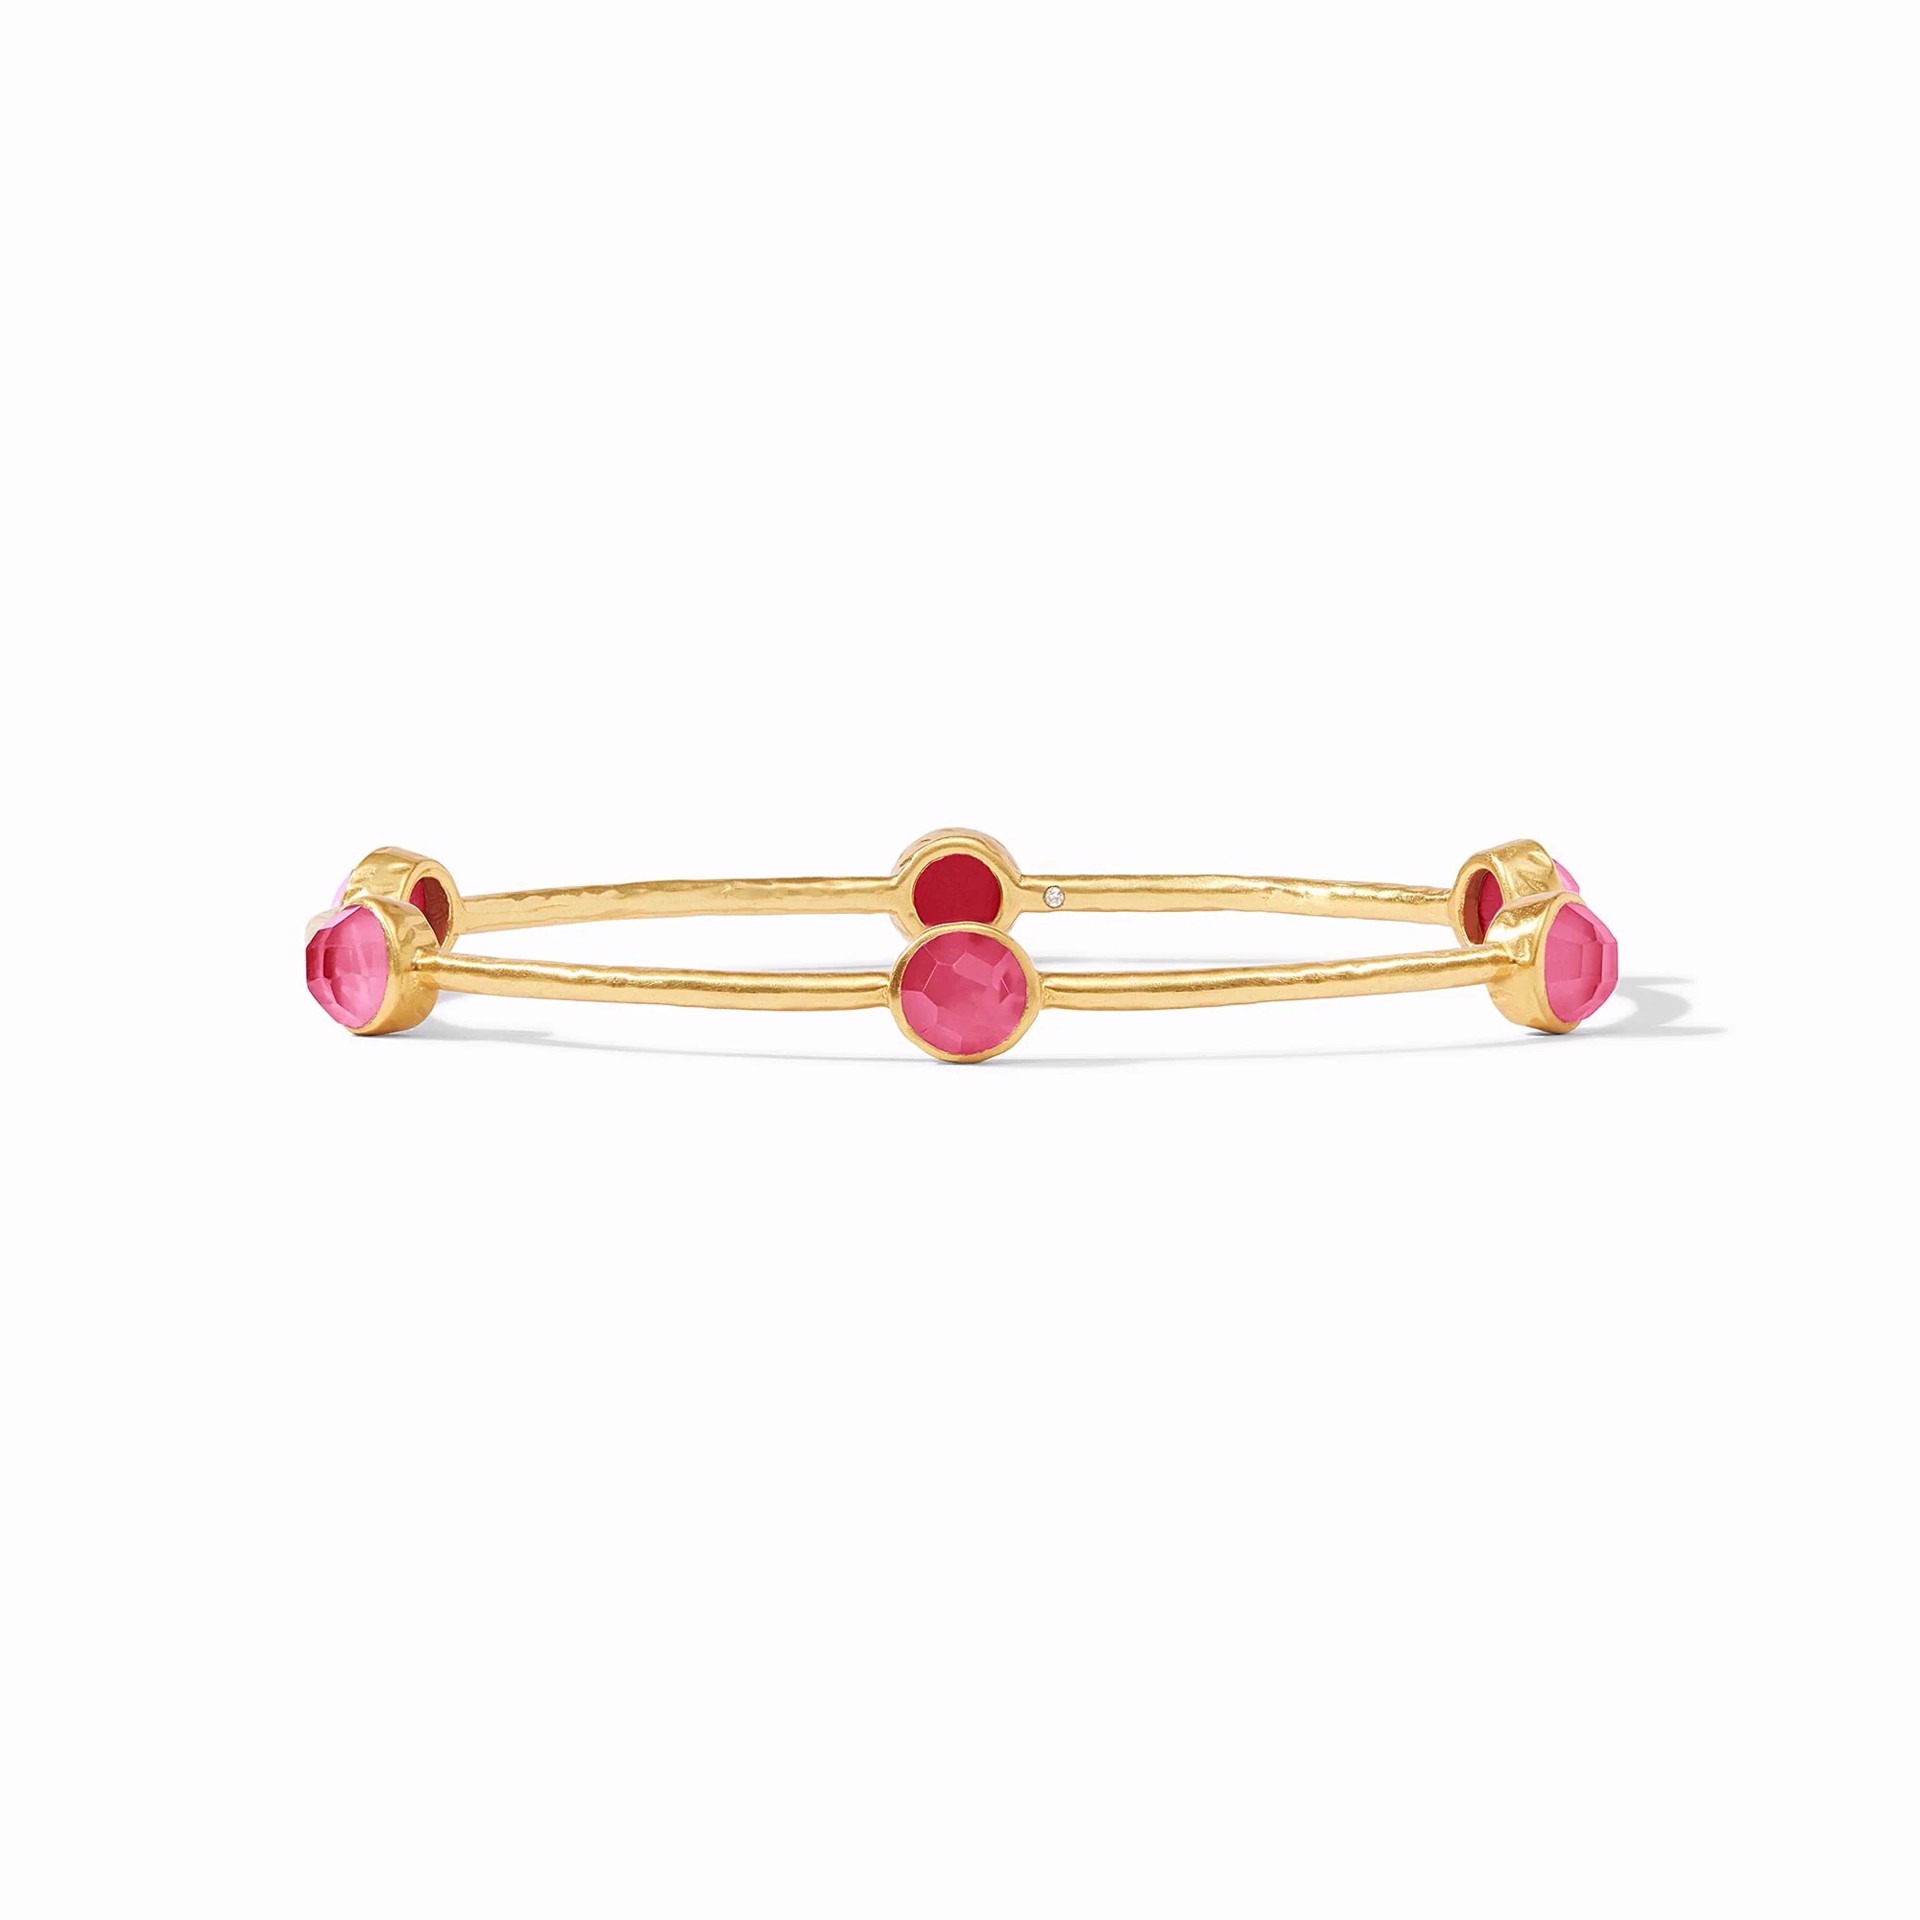 Milano Luxe Bangle - Raspberry / Medium by Julie Vos